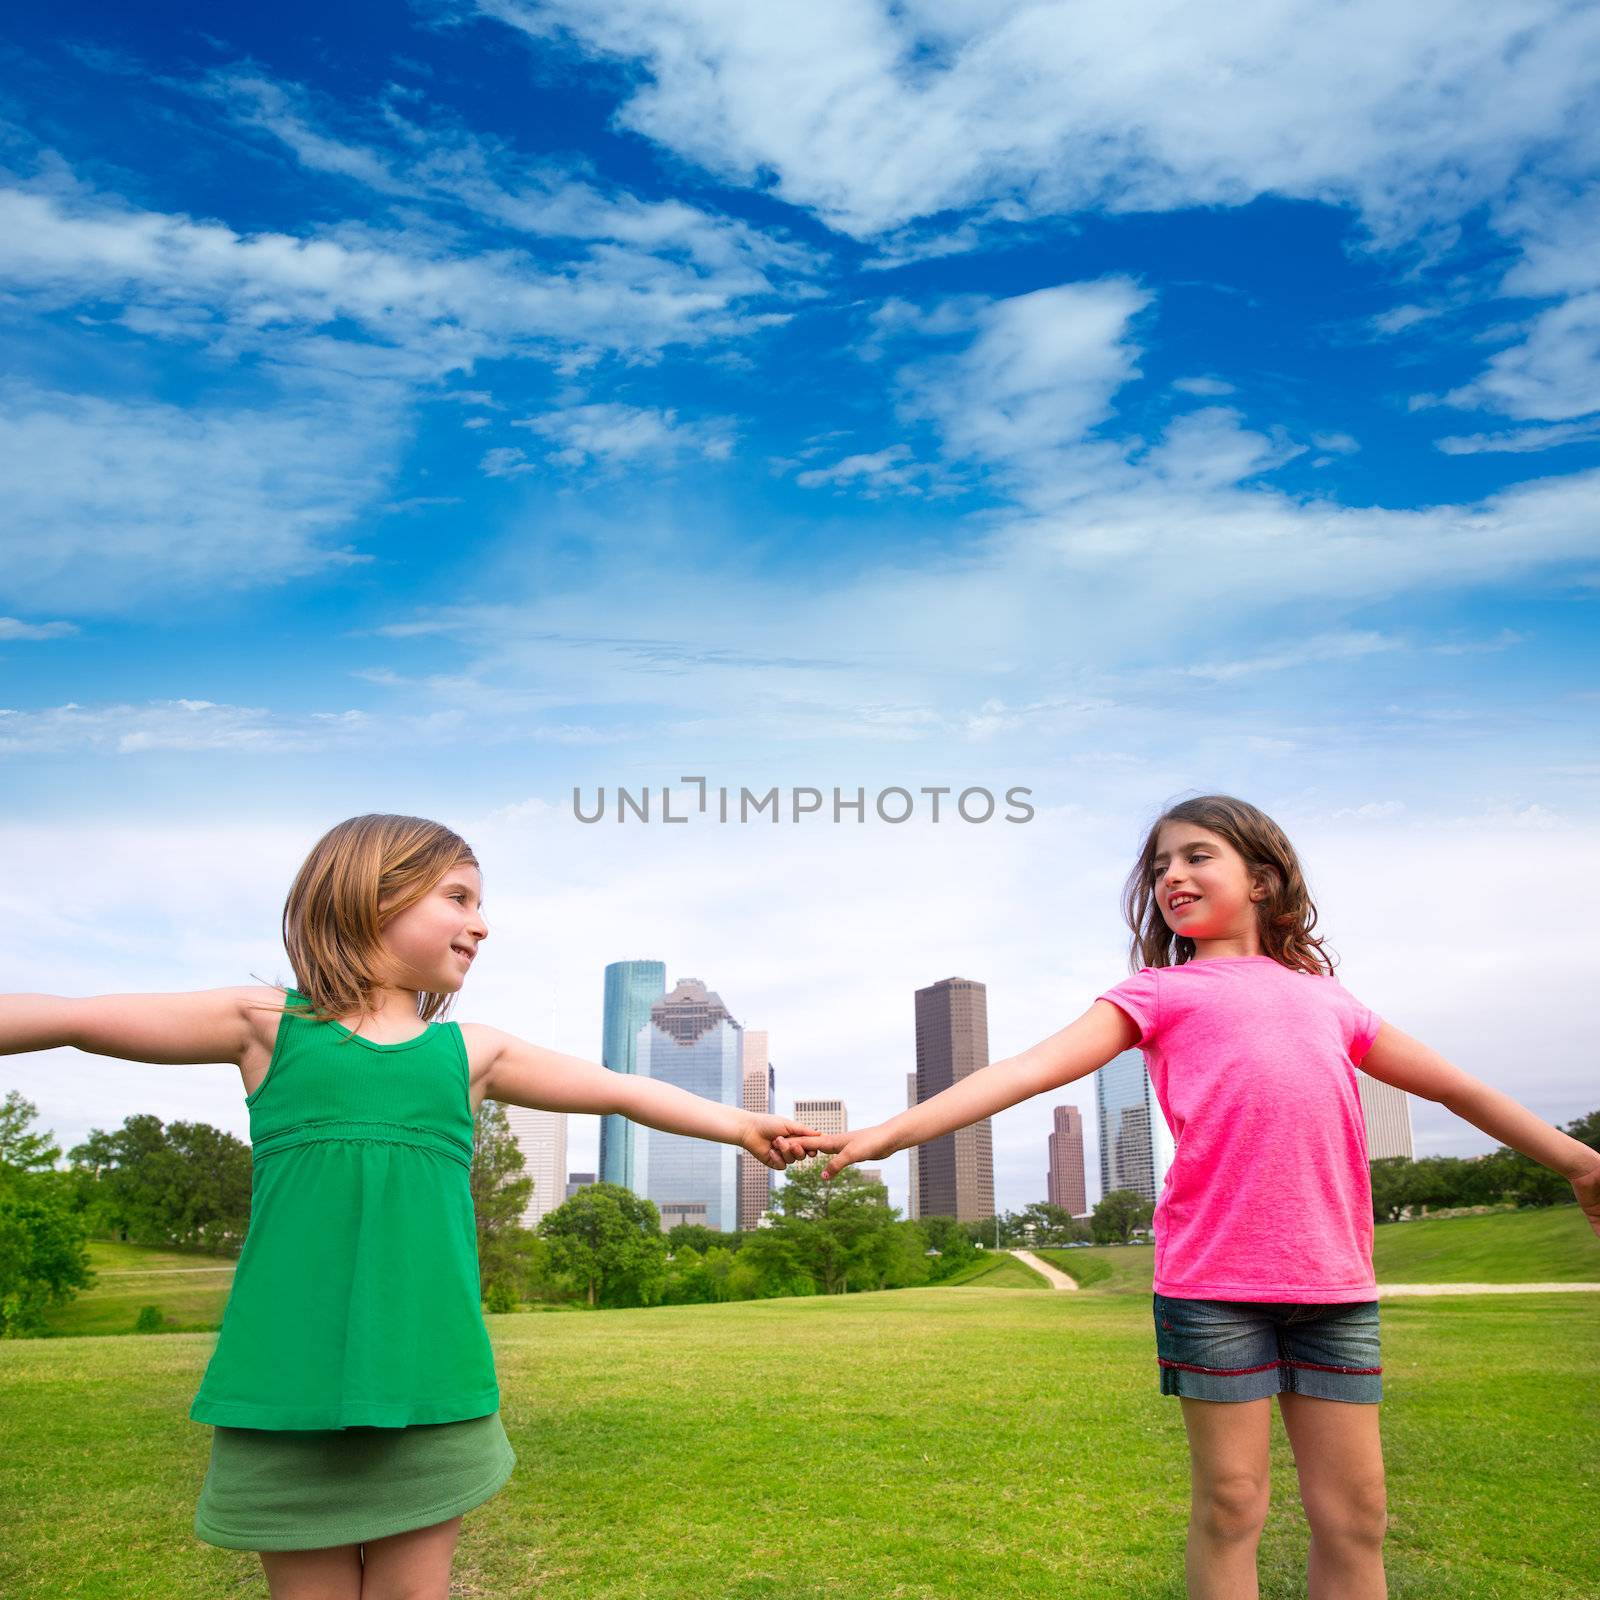 Two sister girls friends playing holding hand in urban modern skyline on park lawn